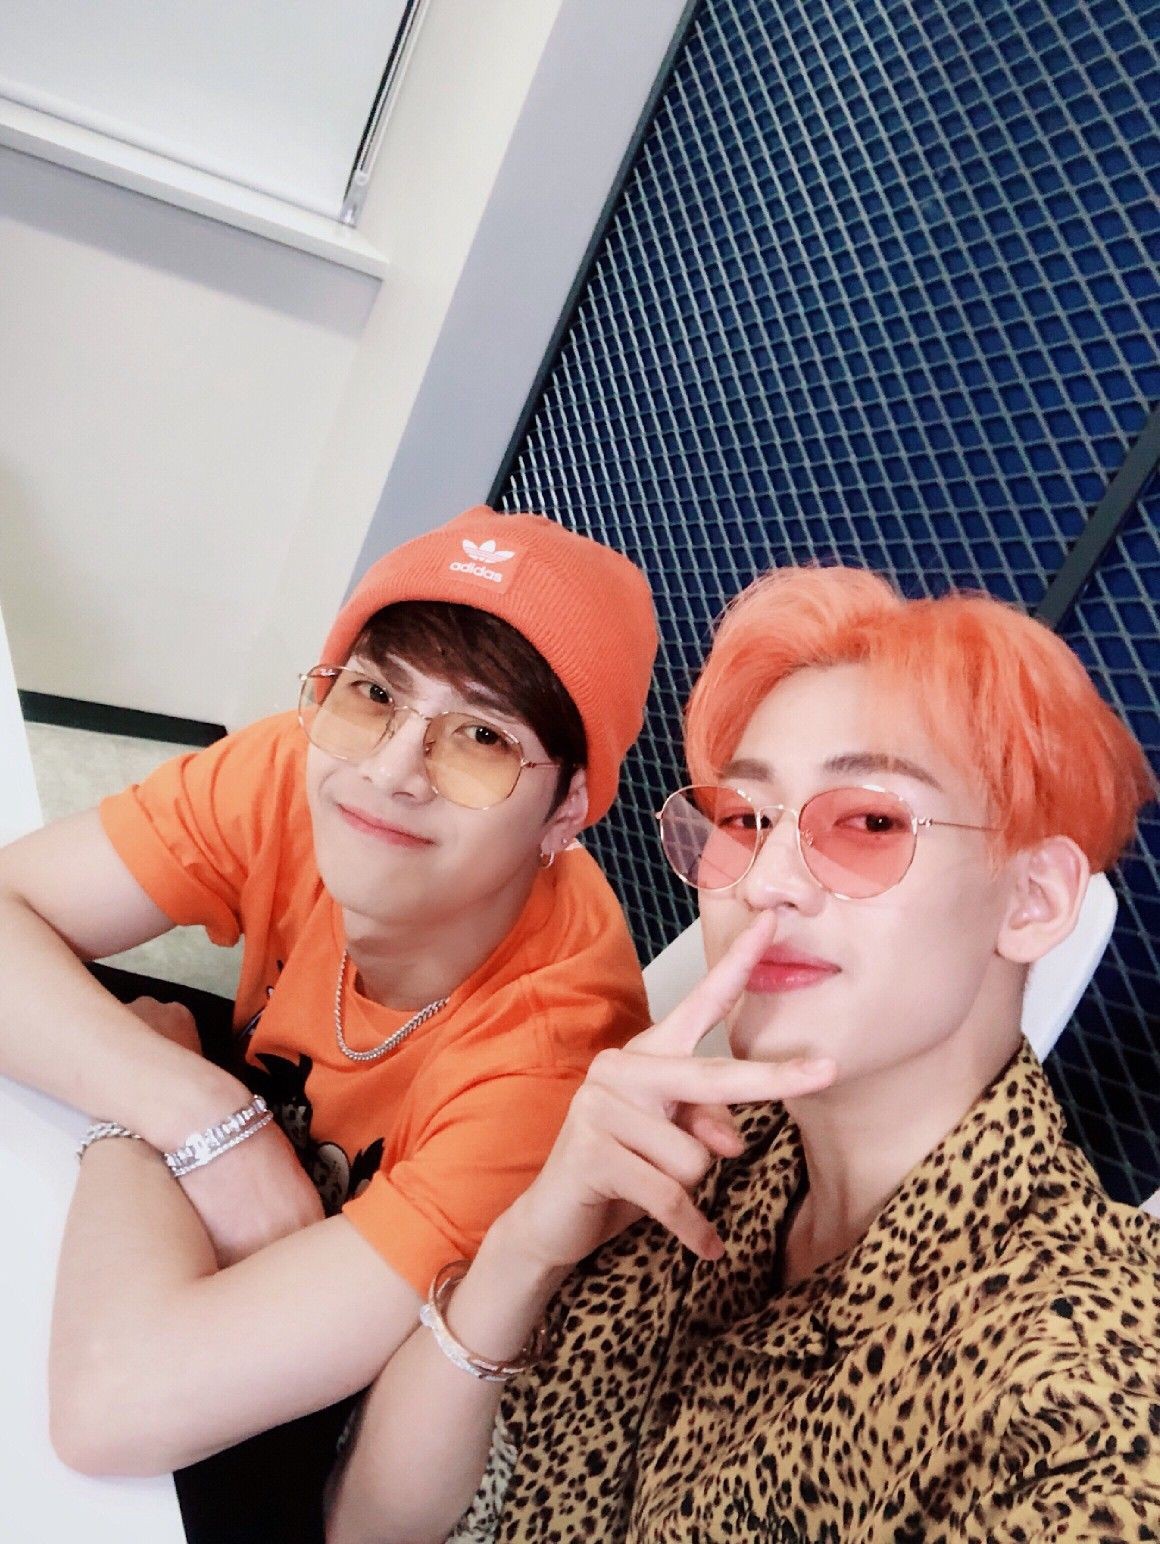 Got7 S Bambam And Jackson Once Hilariously Proved That They Are Total Opposites In This One Way